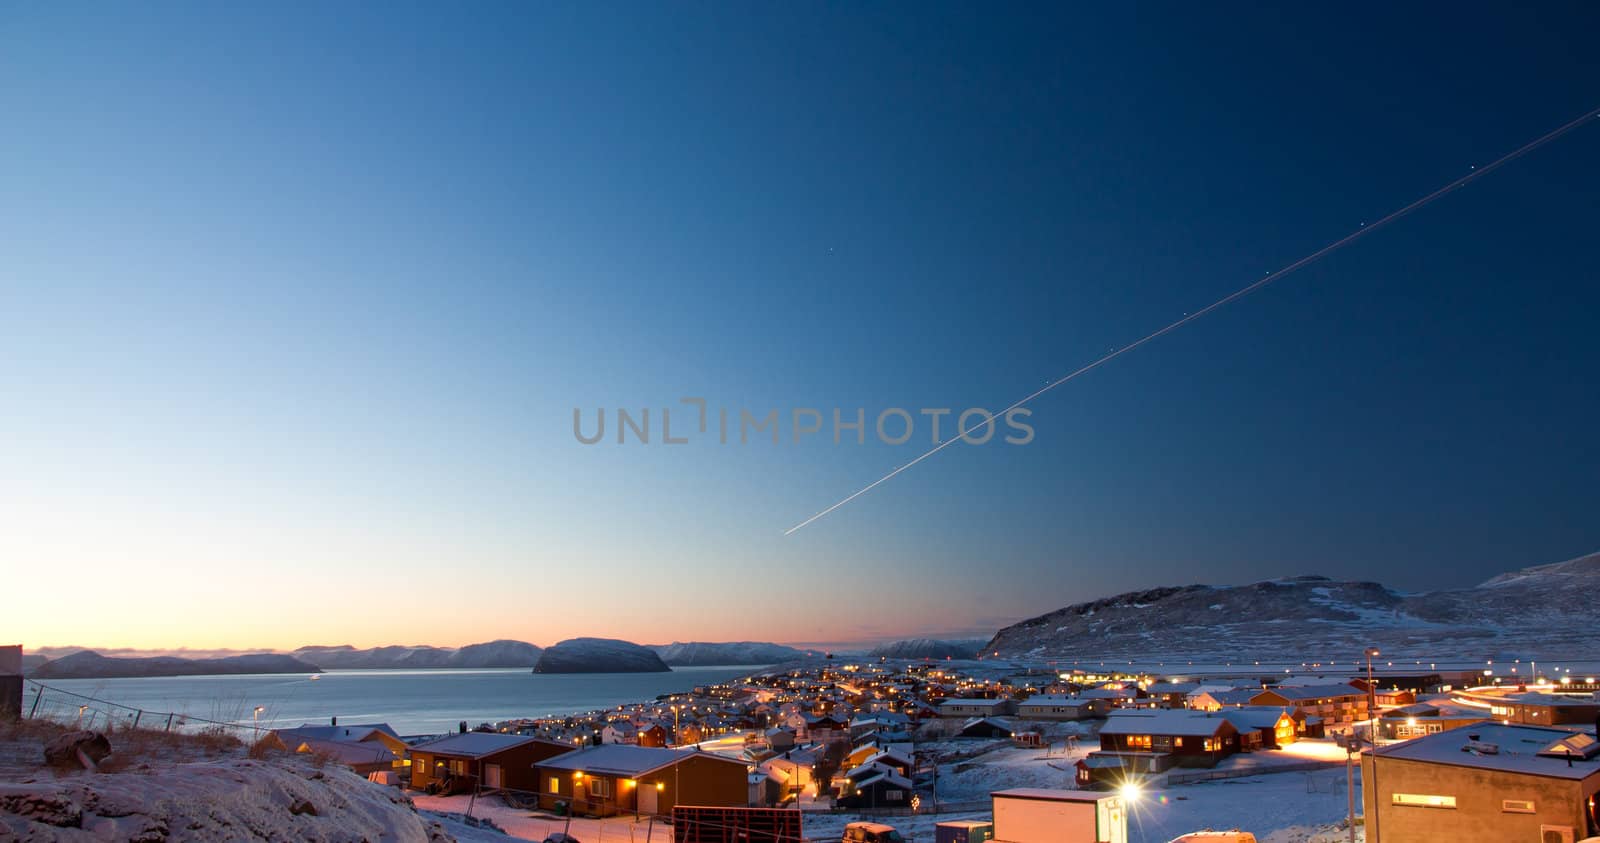 Picture of a part of the  northermost city in the world, Hammerfest. The sun is just in the horizon during day time